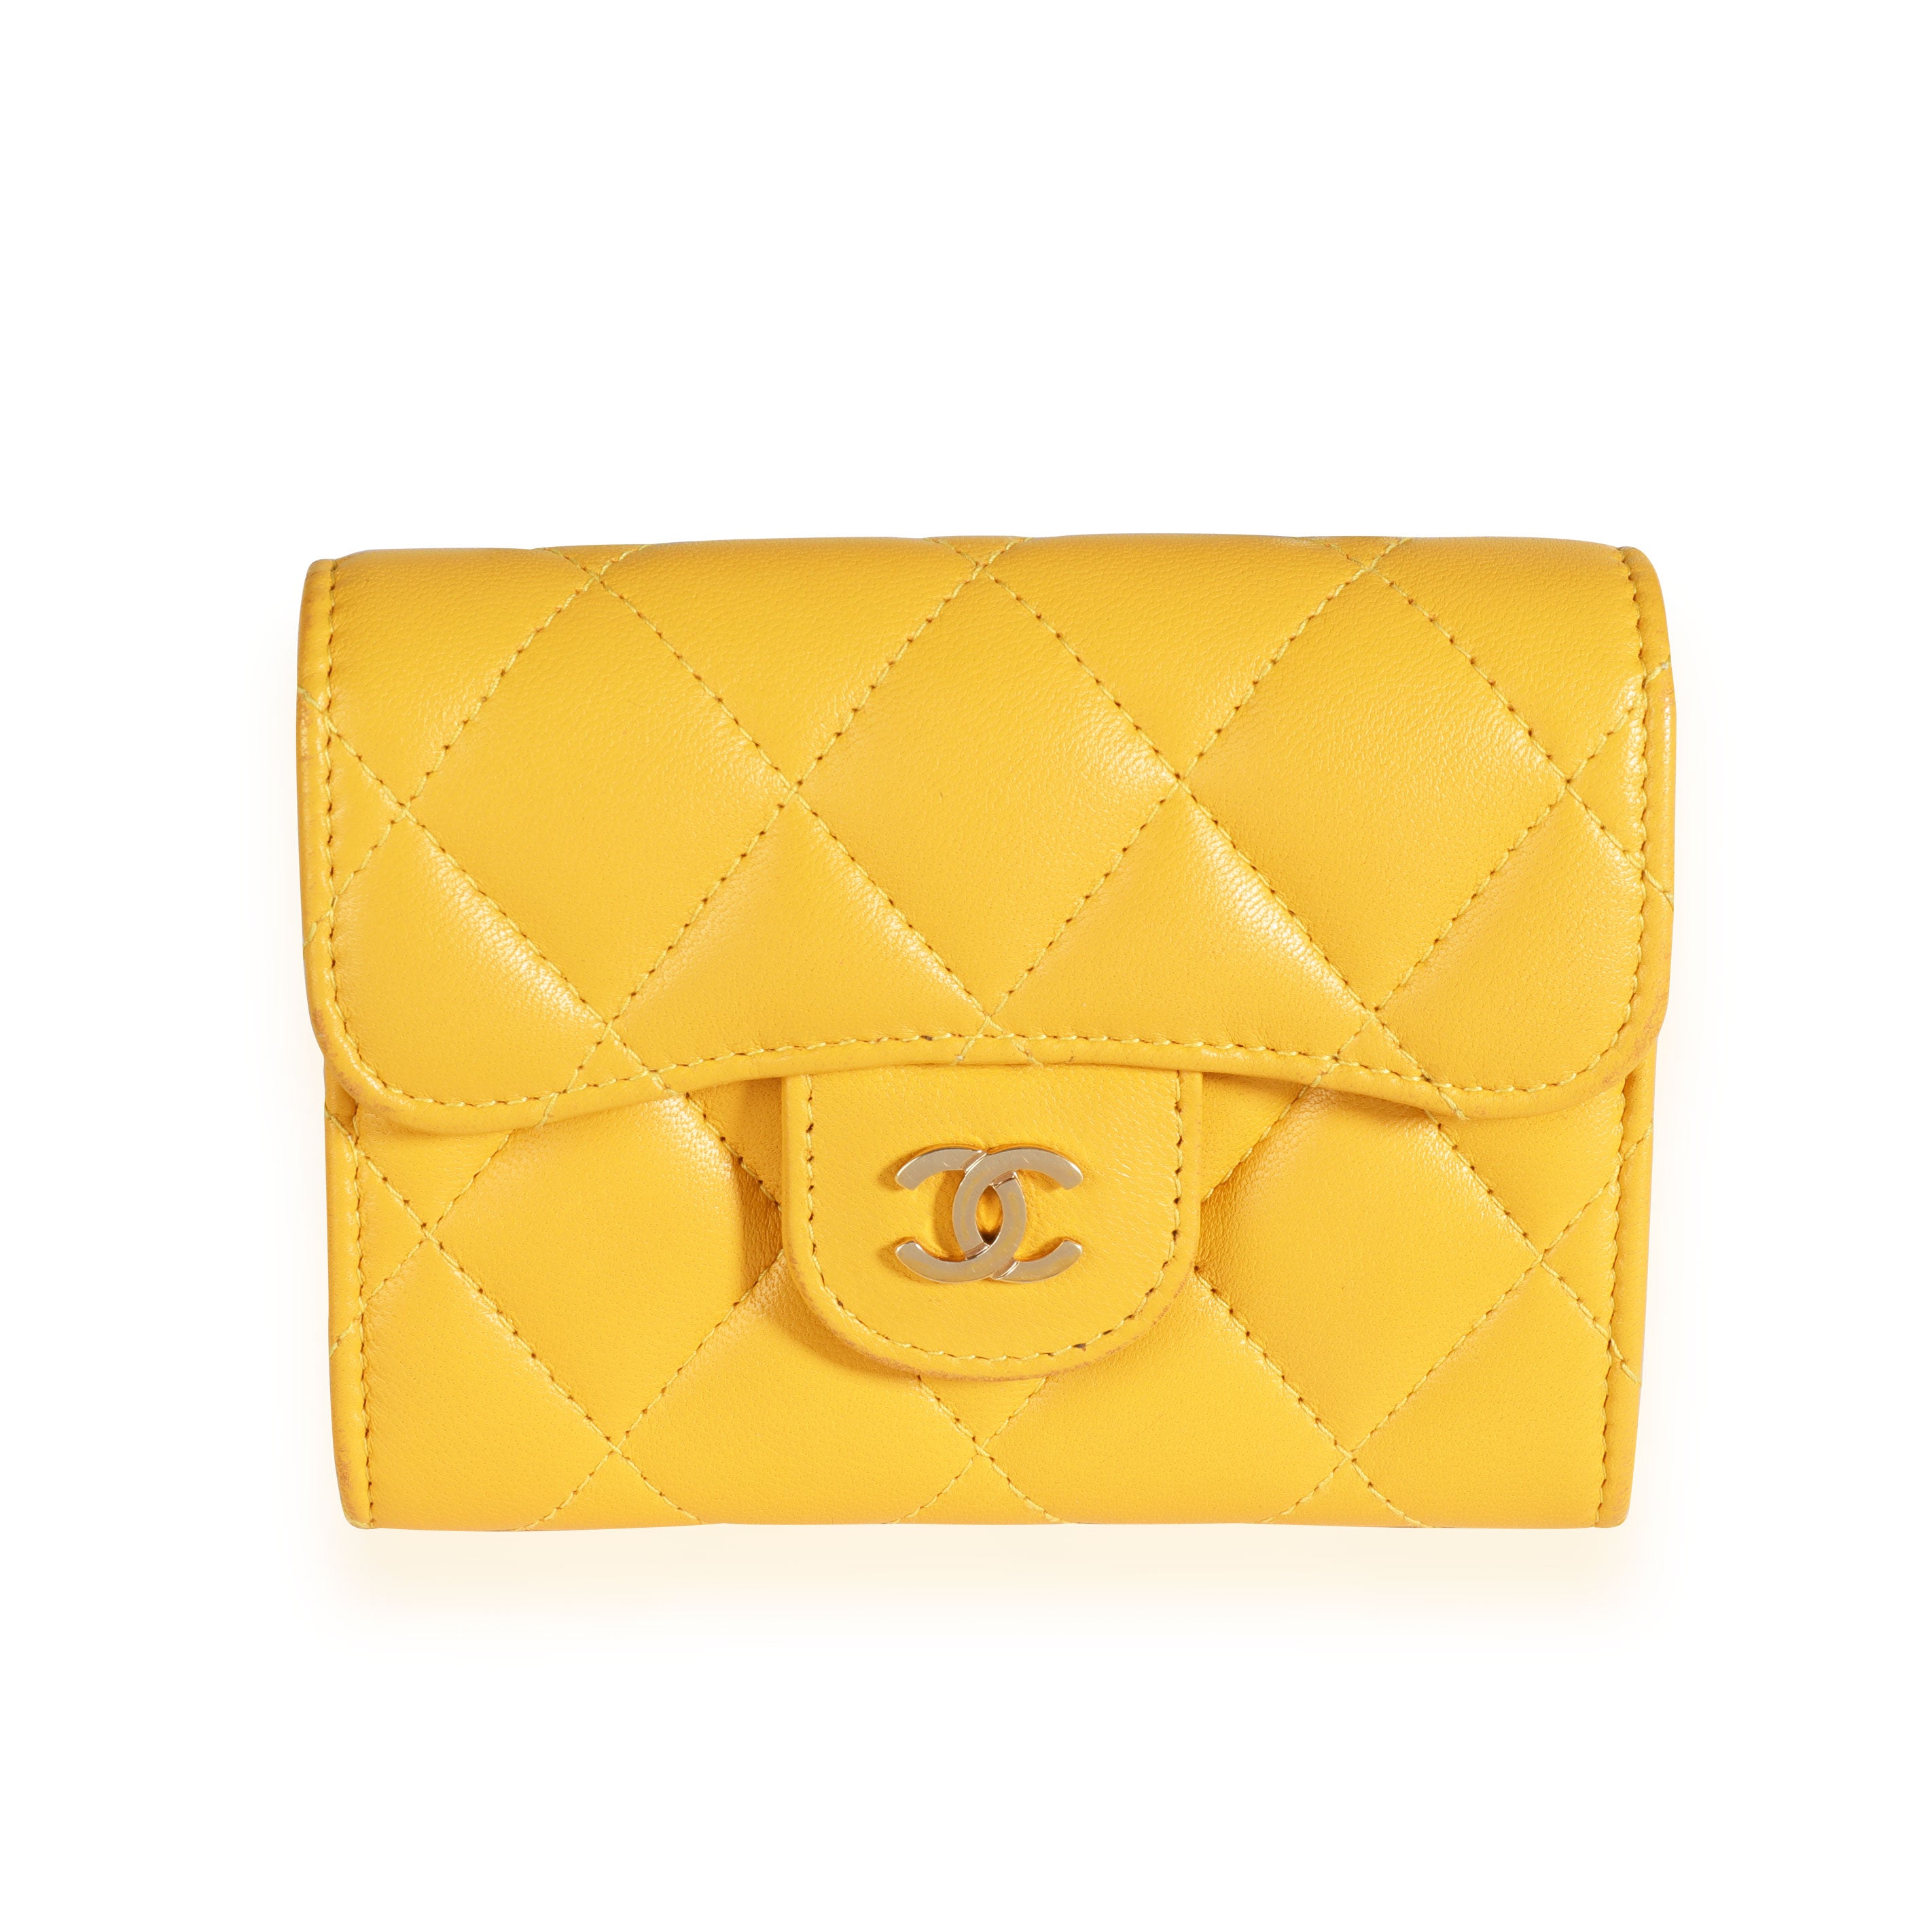 Chanel Yellow Quilted Lambskin Card Holder Wallet  myGemma  CH  Item  112280